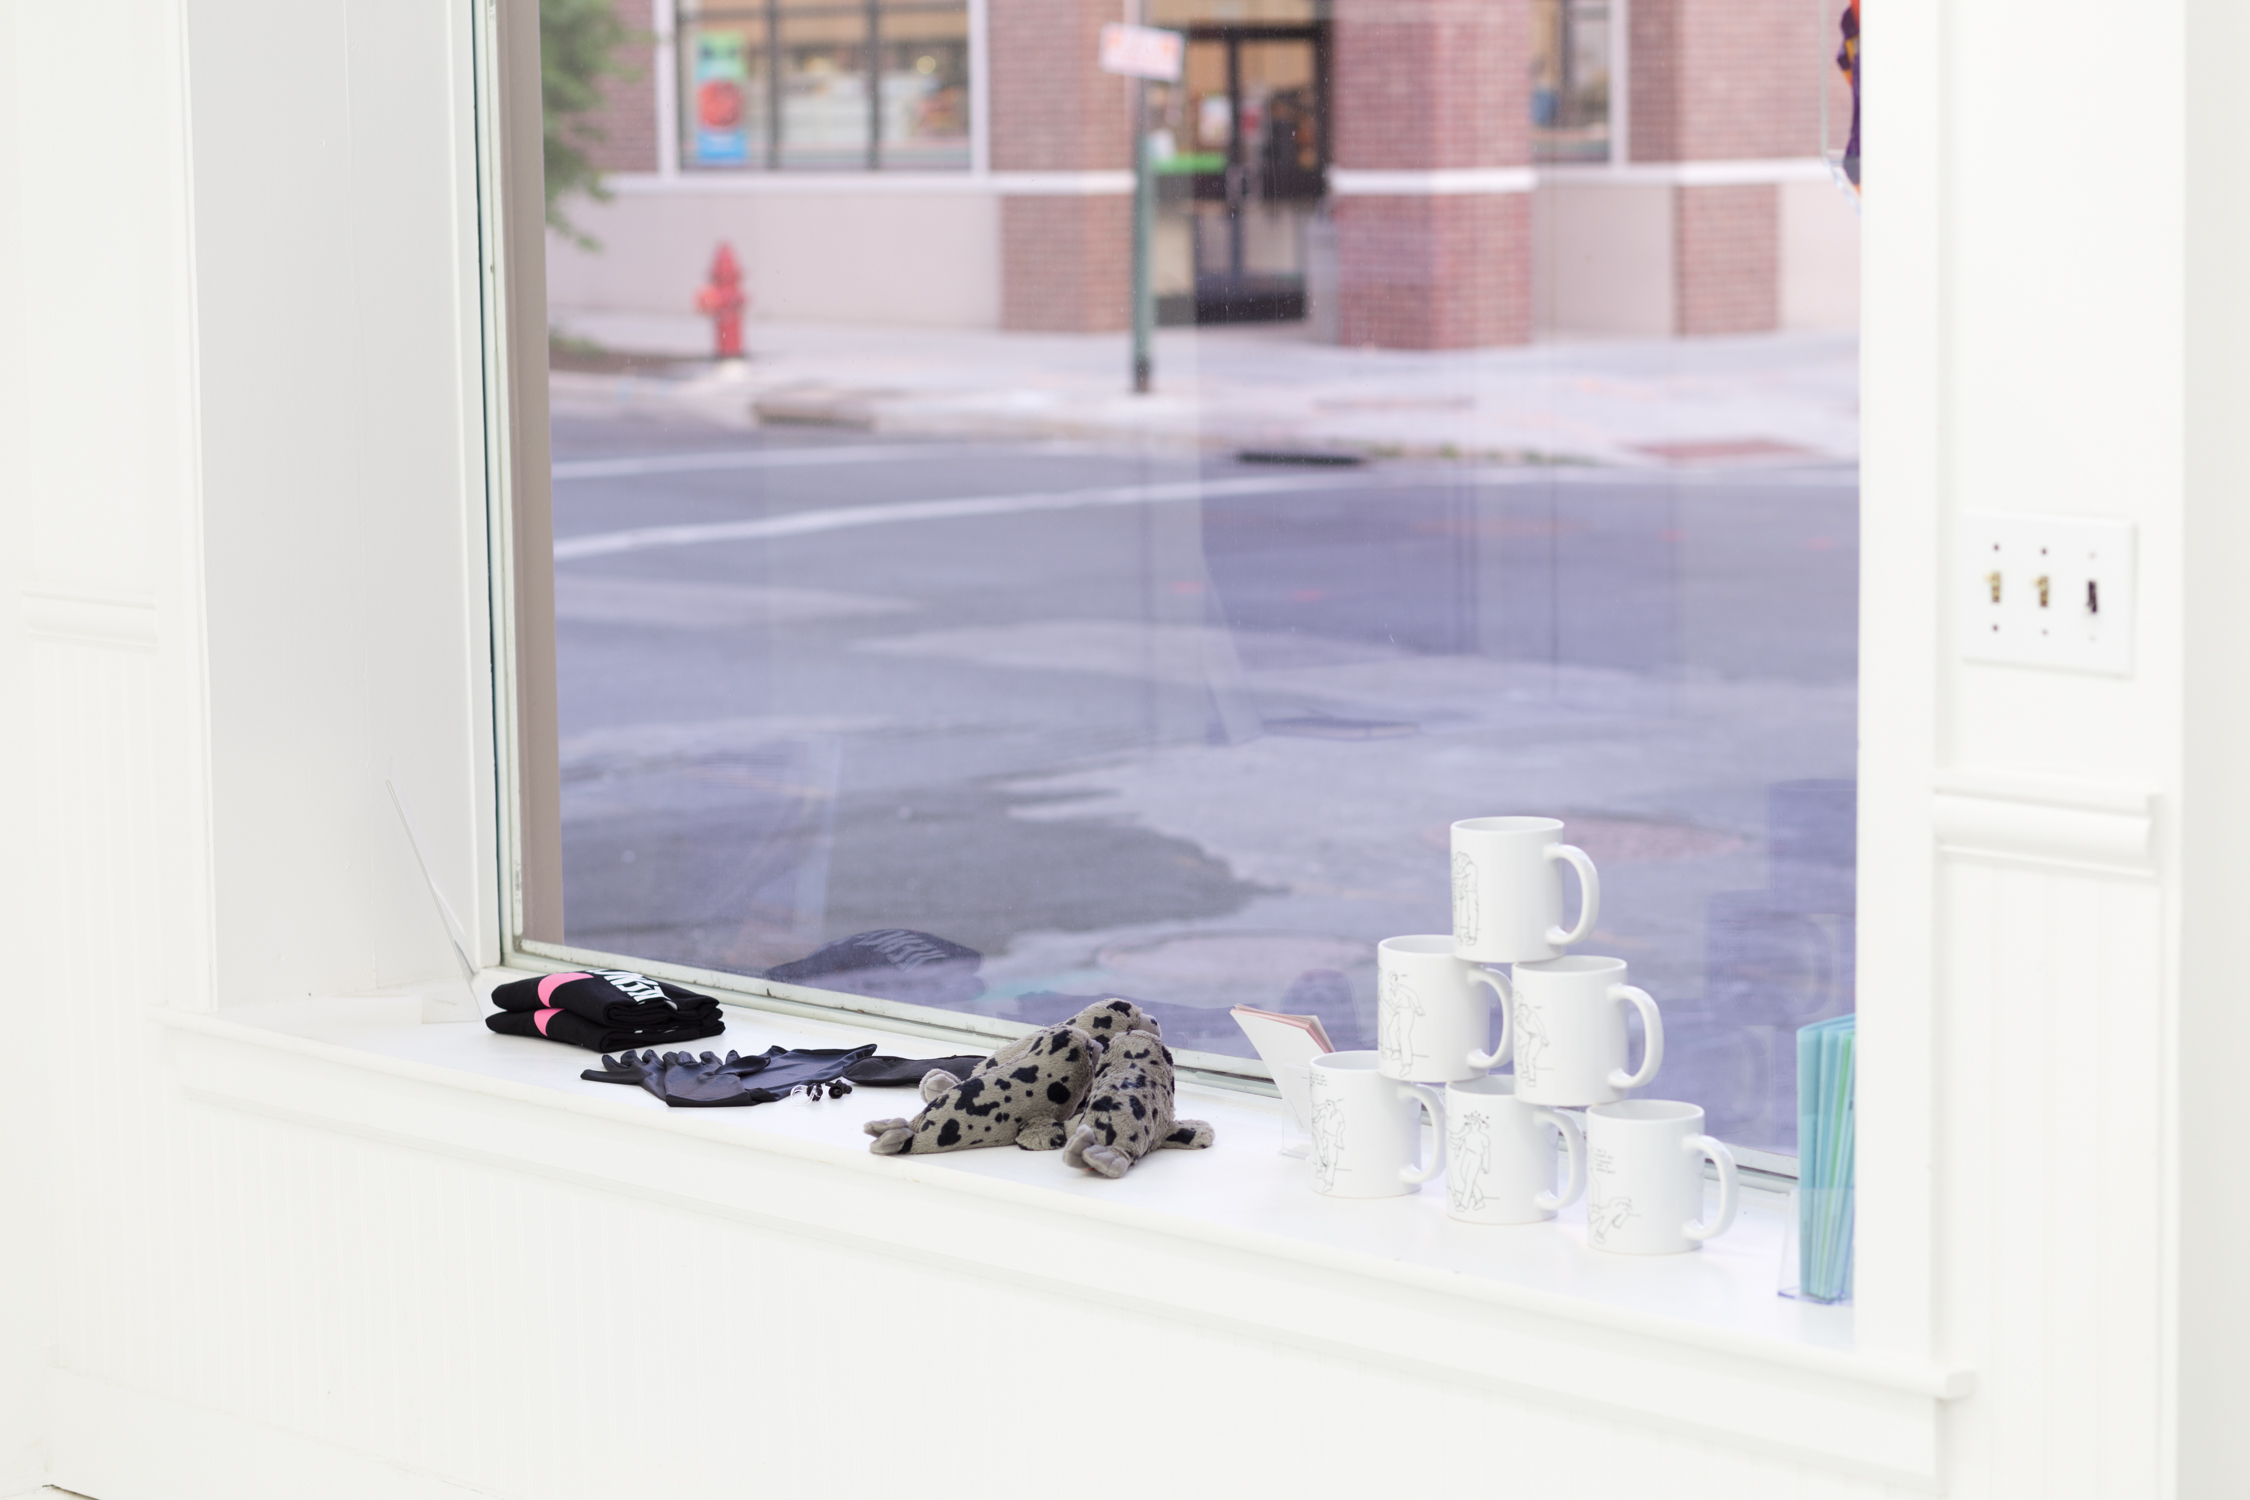 Items sit on the windowsill: a stack of mugs, pamphlets, and seal stuffed animals